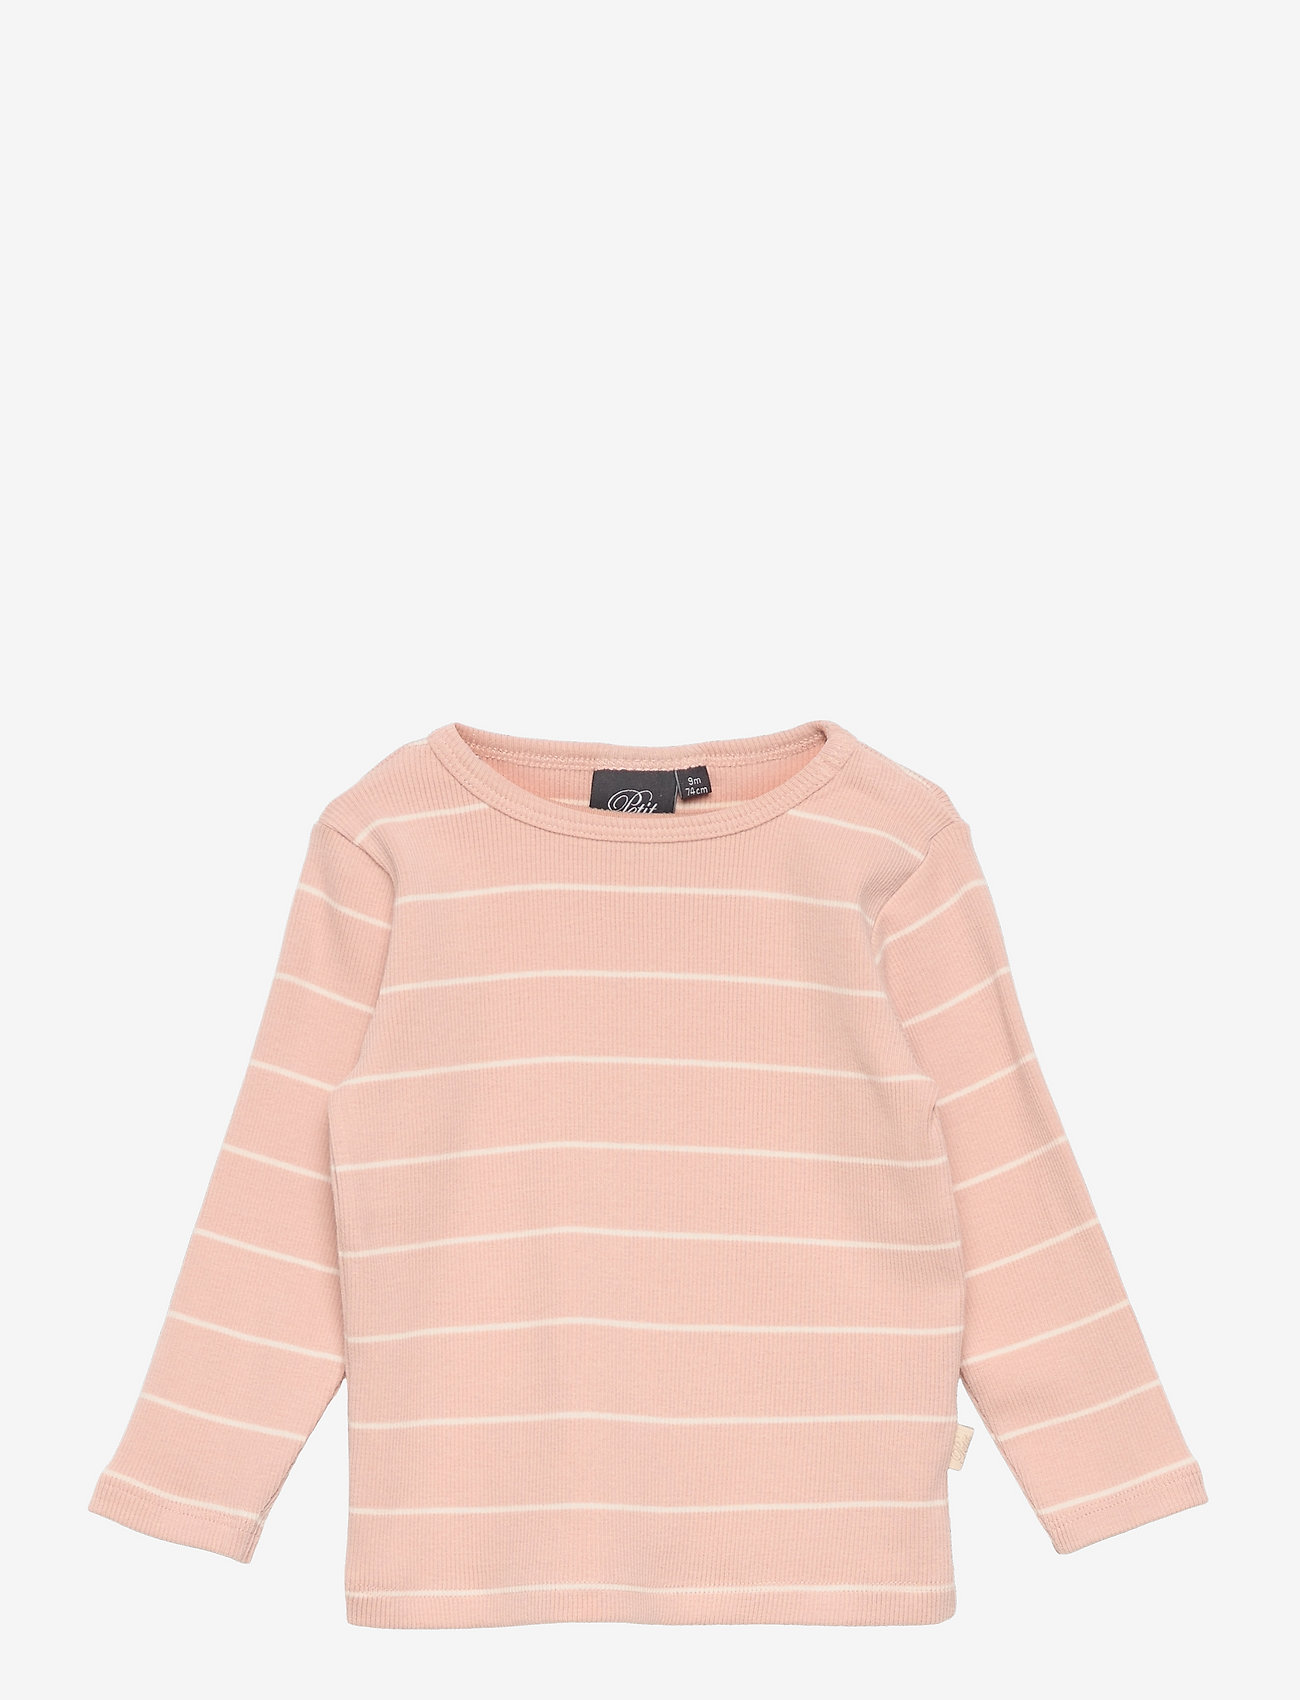 Sofie Schnoor Baby and Kids - T-shirt long-sleeve - long-sleeved t-shirts - light rose - 0